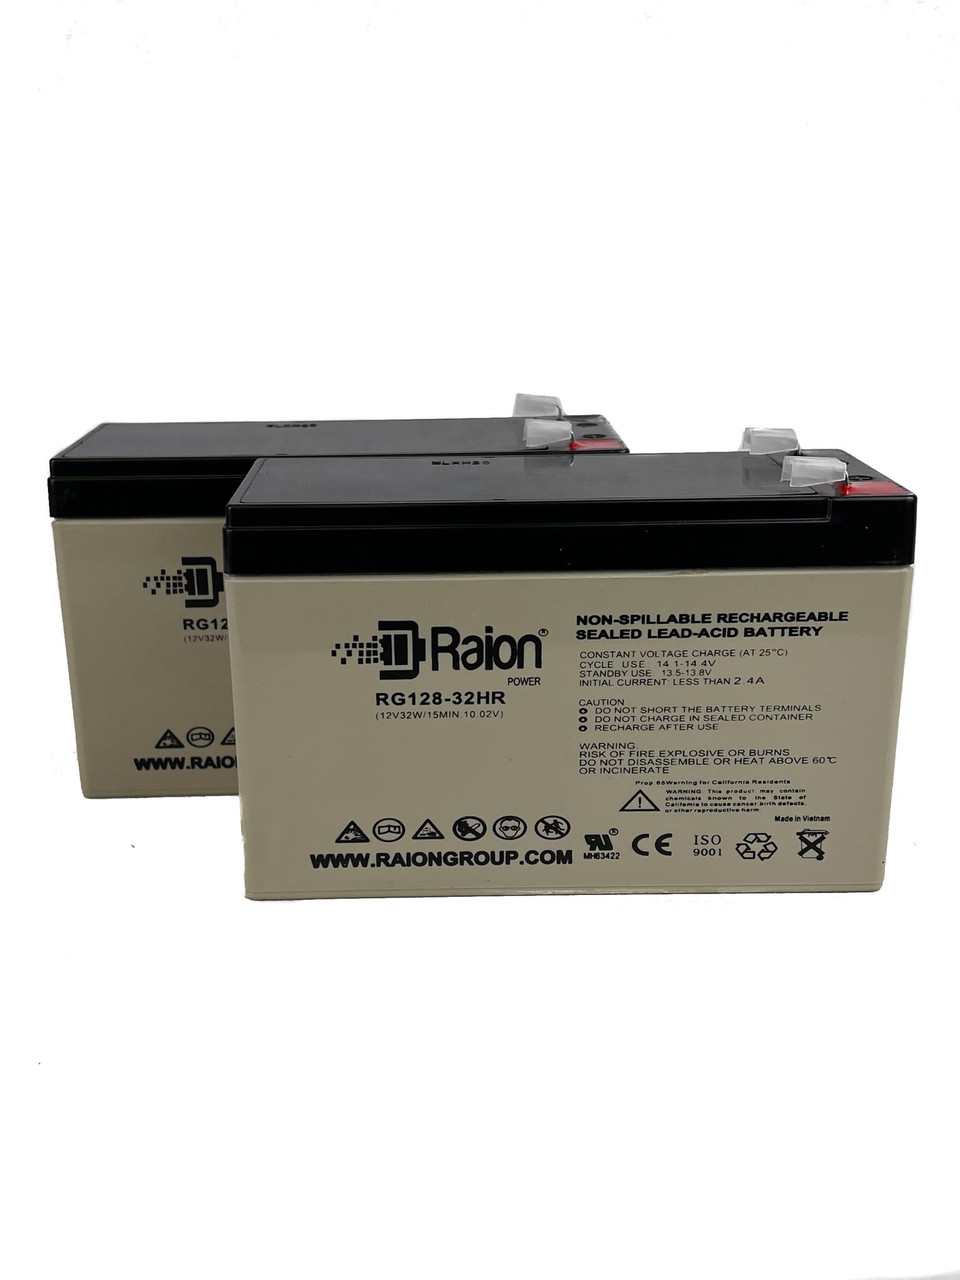 Raion Power 12V 7.5Ah High Rate Discharge UPS Batteries for MGE Pulsar SV6 - 2 Pack